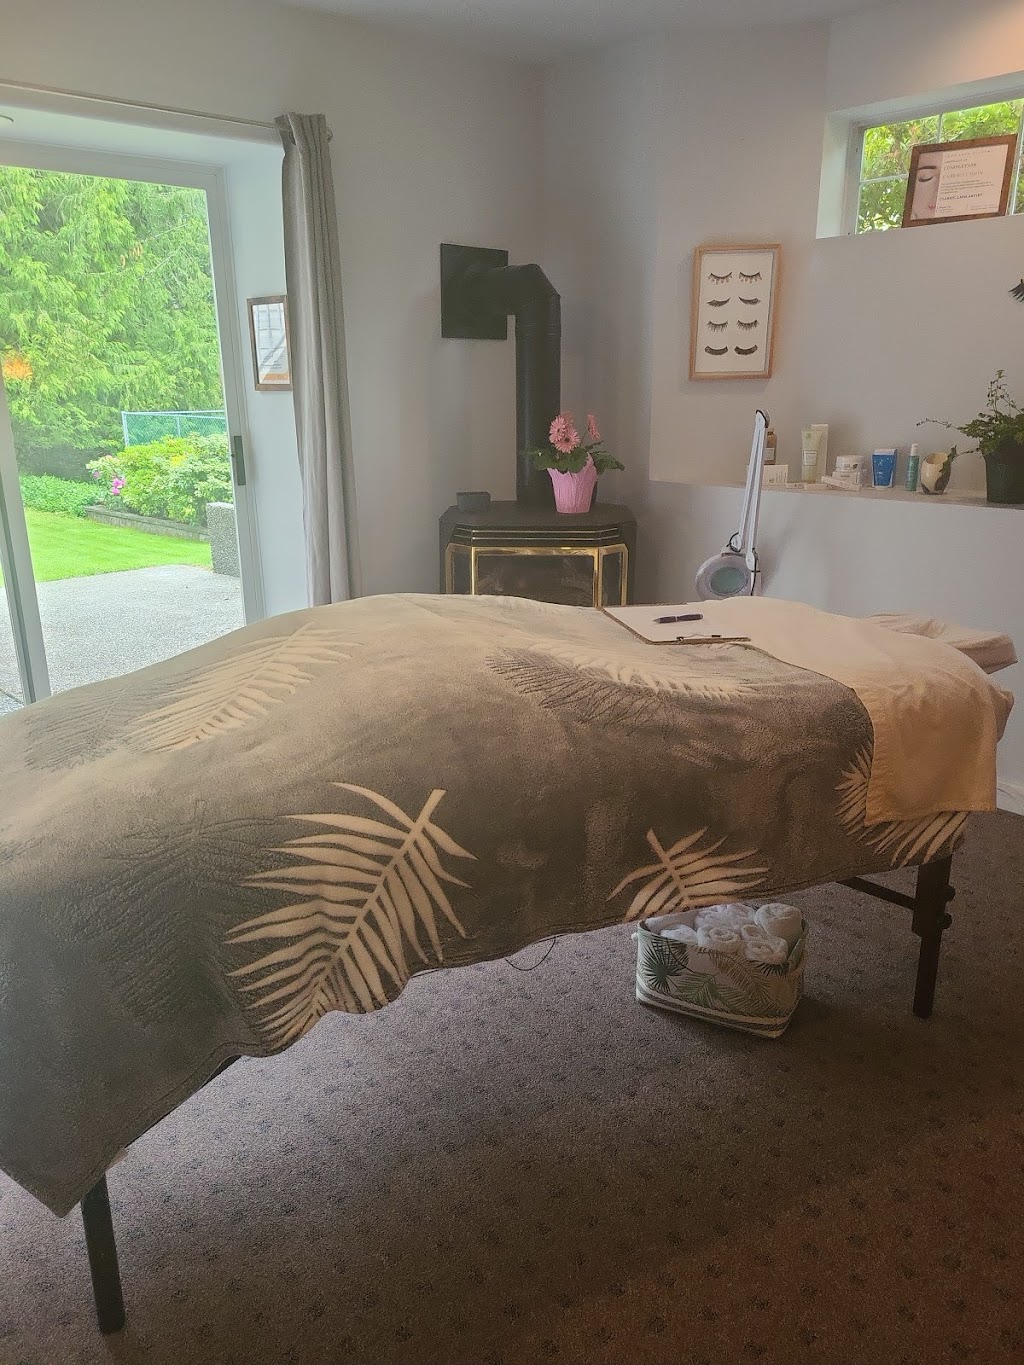 the Fern Spa and Lashes | spa | 2373 Terrace Rd, Shawnigan Lake, BC V0R 2W1, Canada | 2507153103 OR +1 250-715-3103